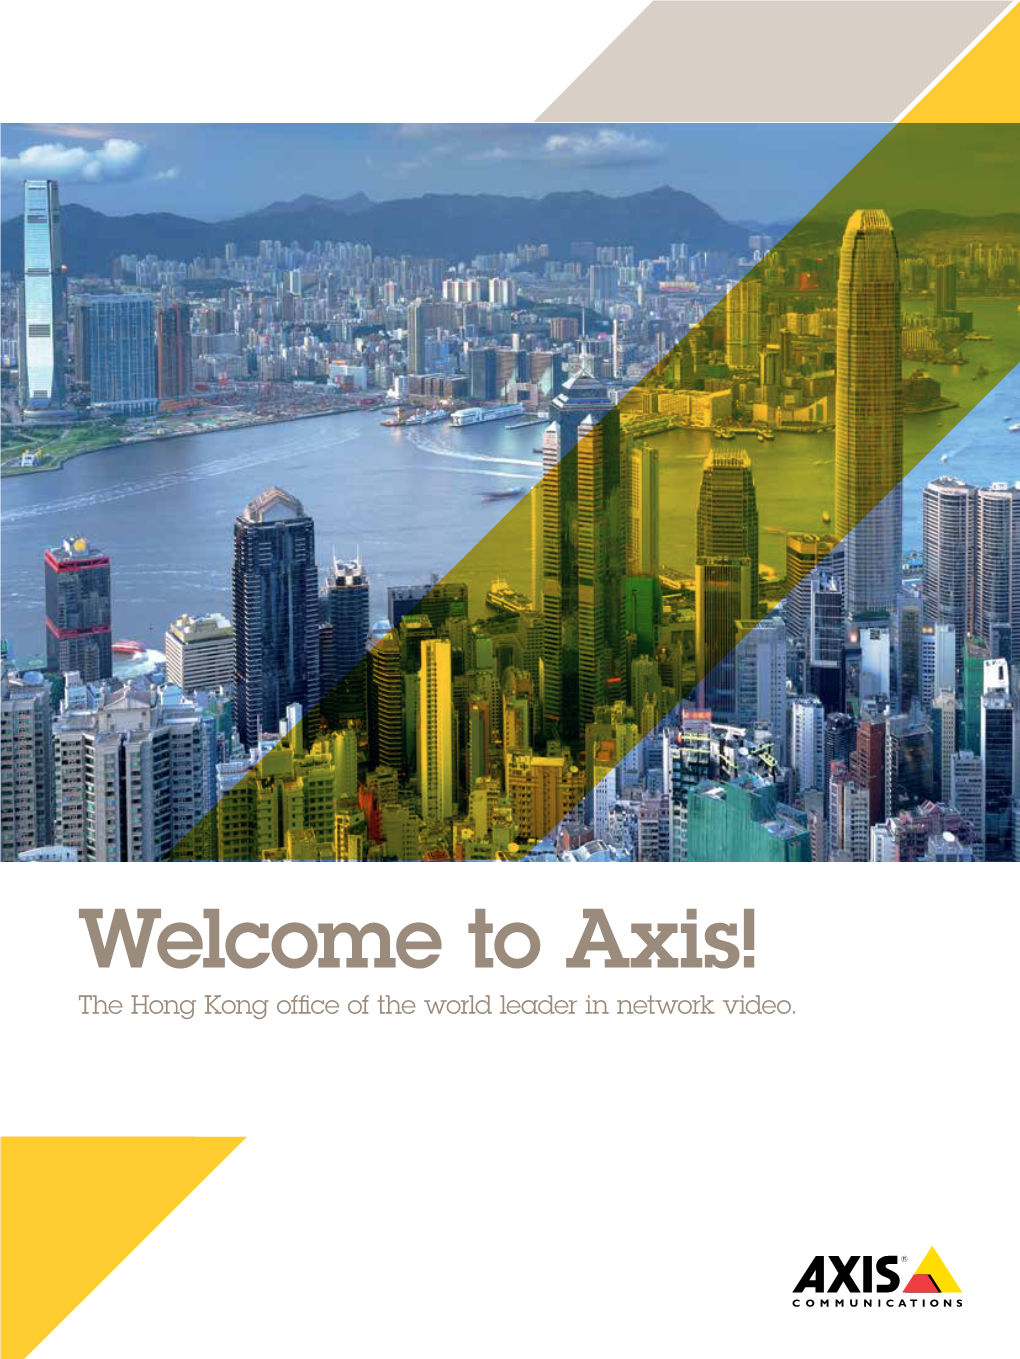 Welcome to Axis! the Hong Kong Office of the World Leader in Network Video